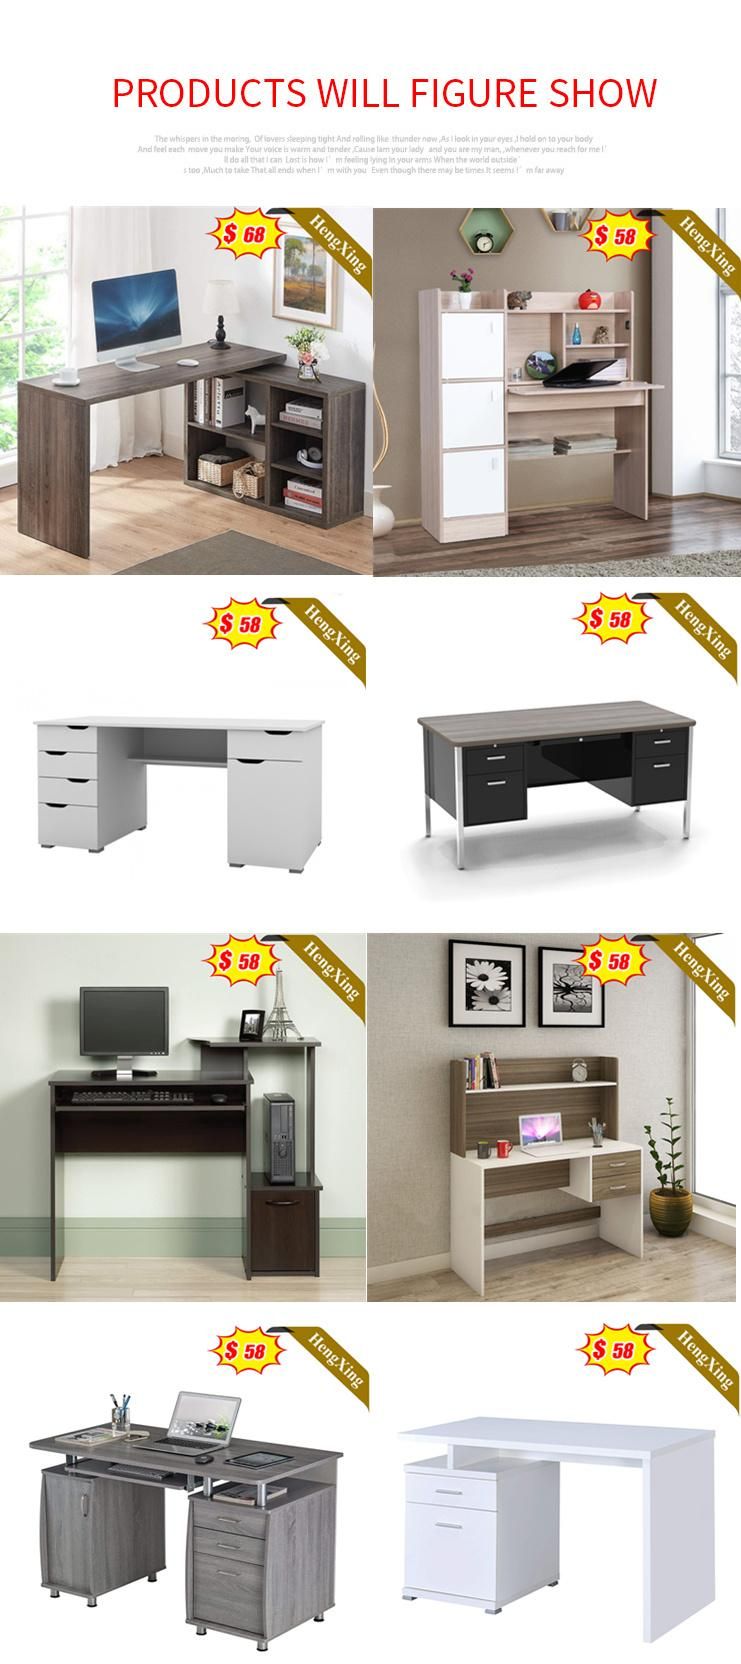 Chinese Furniture White Study Table School Standing Desk Furniture Computer Desk